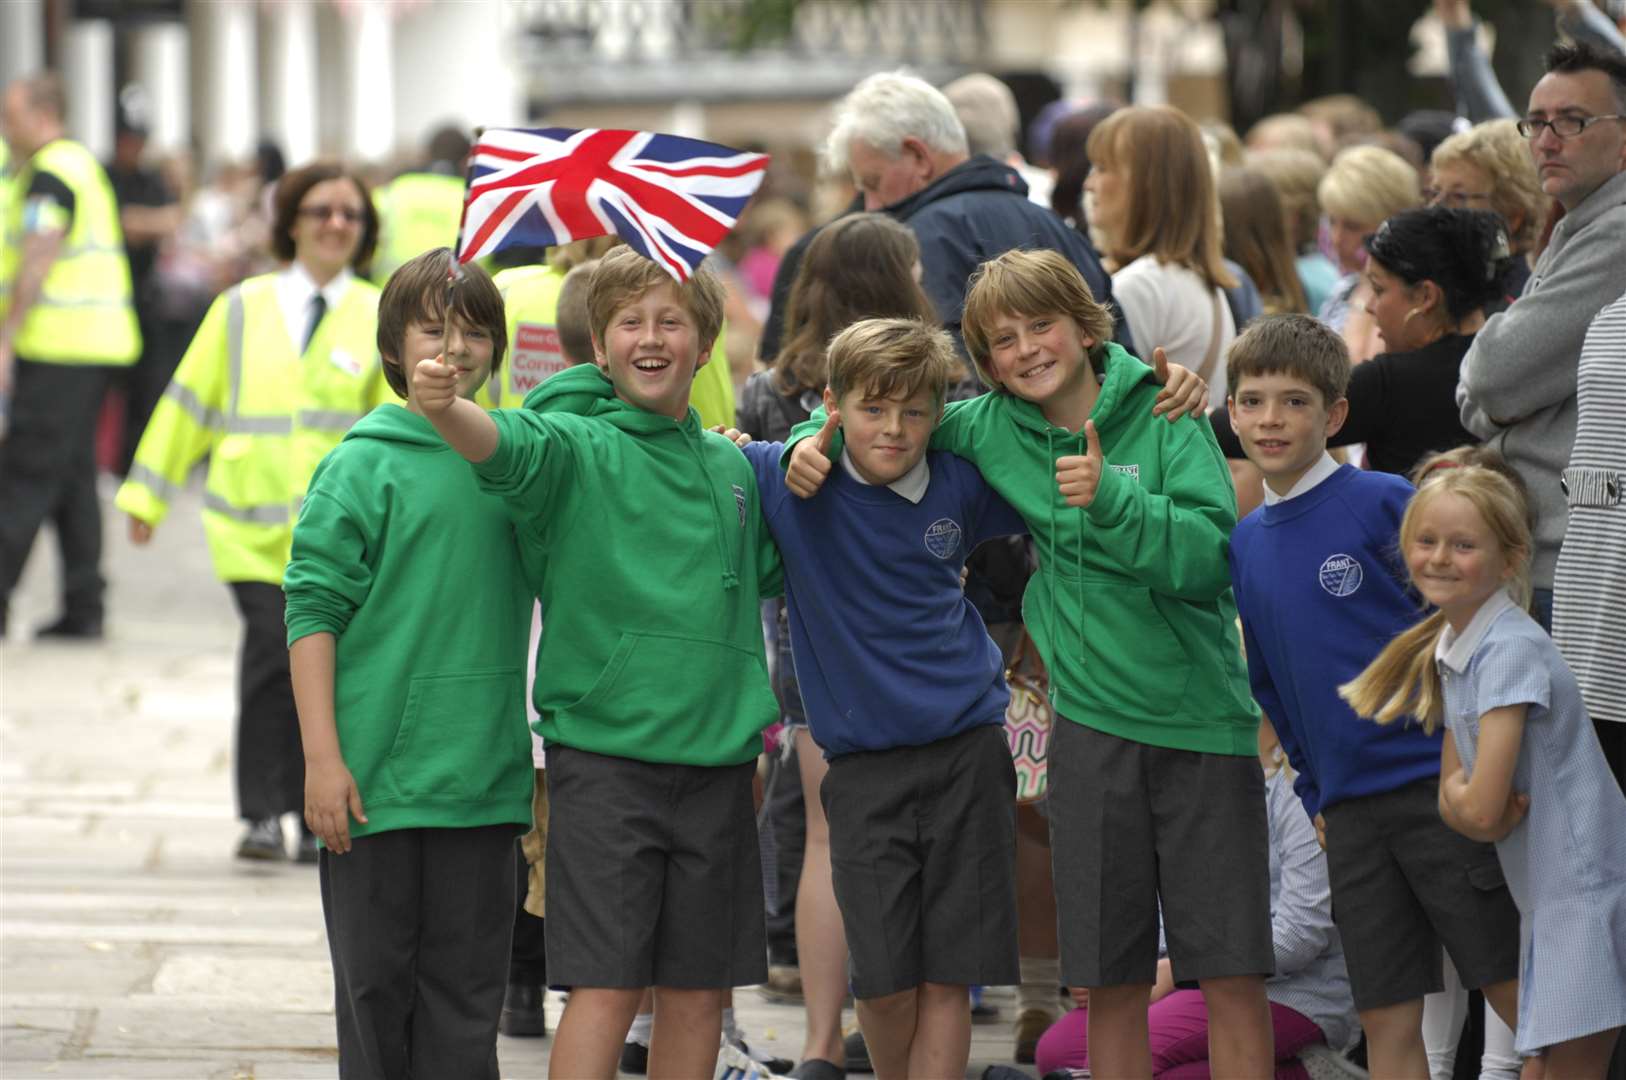 Pupils from Frant School getting ready to welcome the torchbearer in Tunbridge Wells